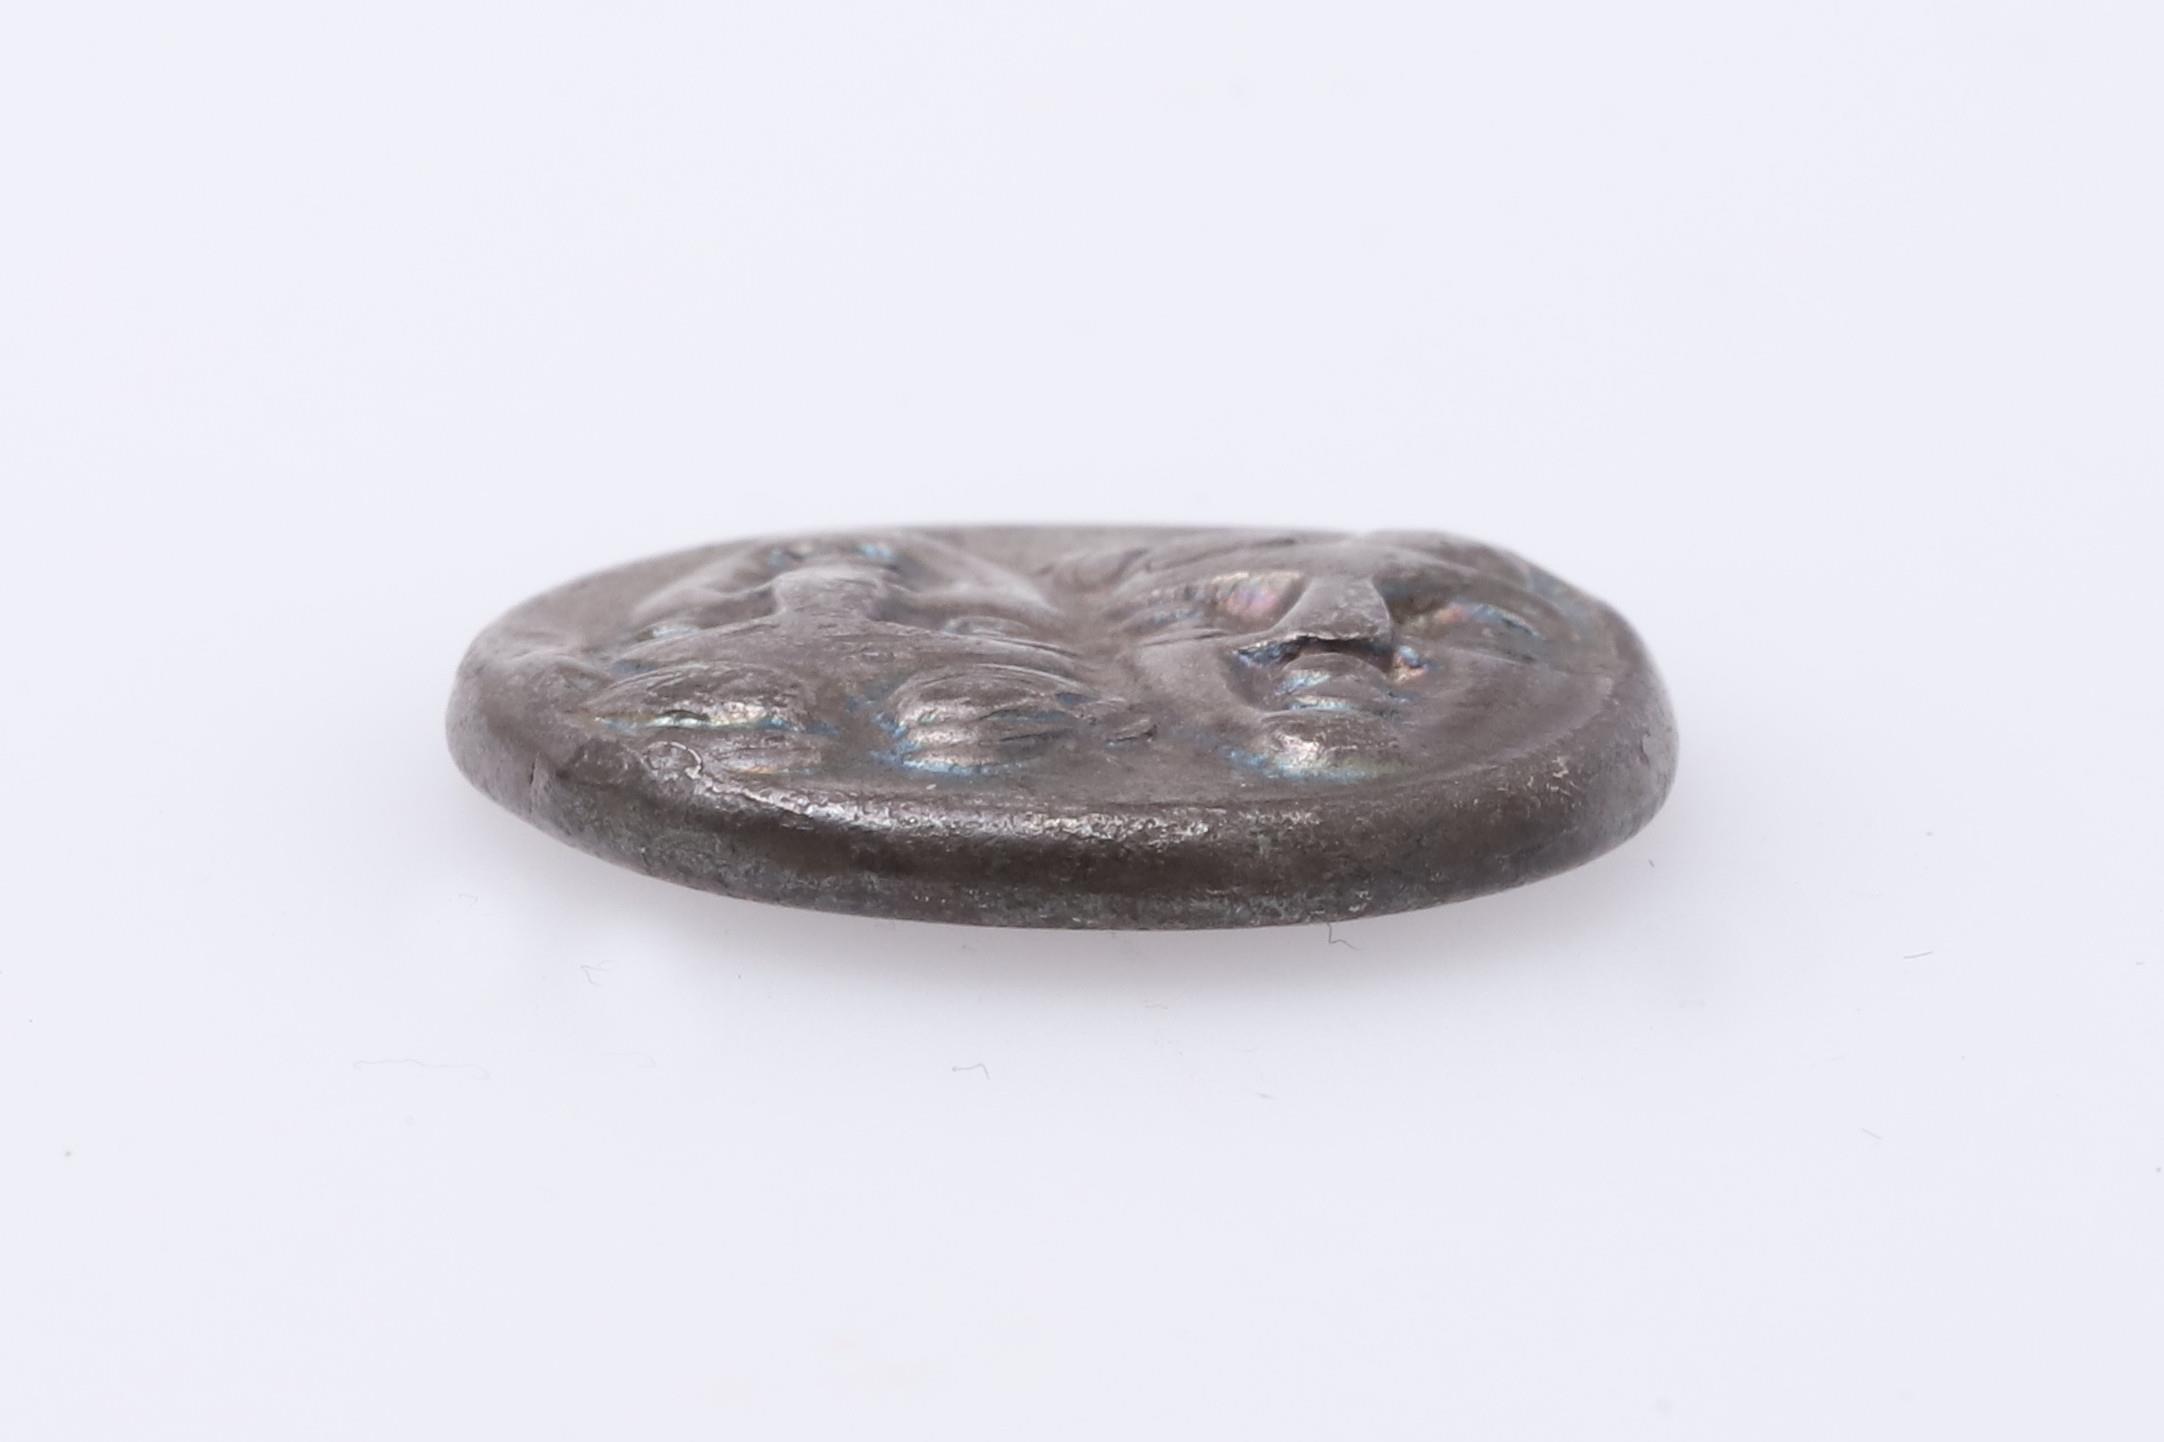 GREEK COINS: ISTROS, SILVER STATER, 400-350 B.C. - Image 4 of 4